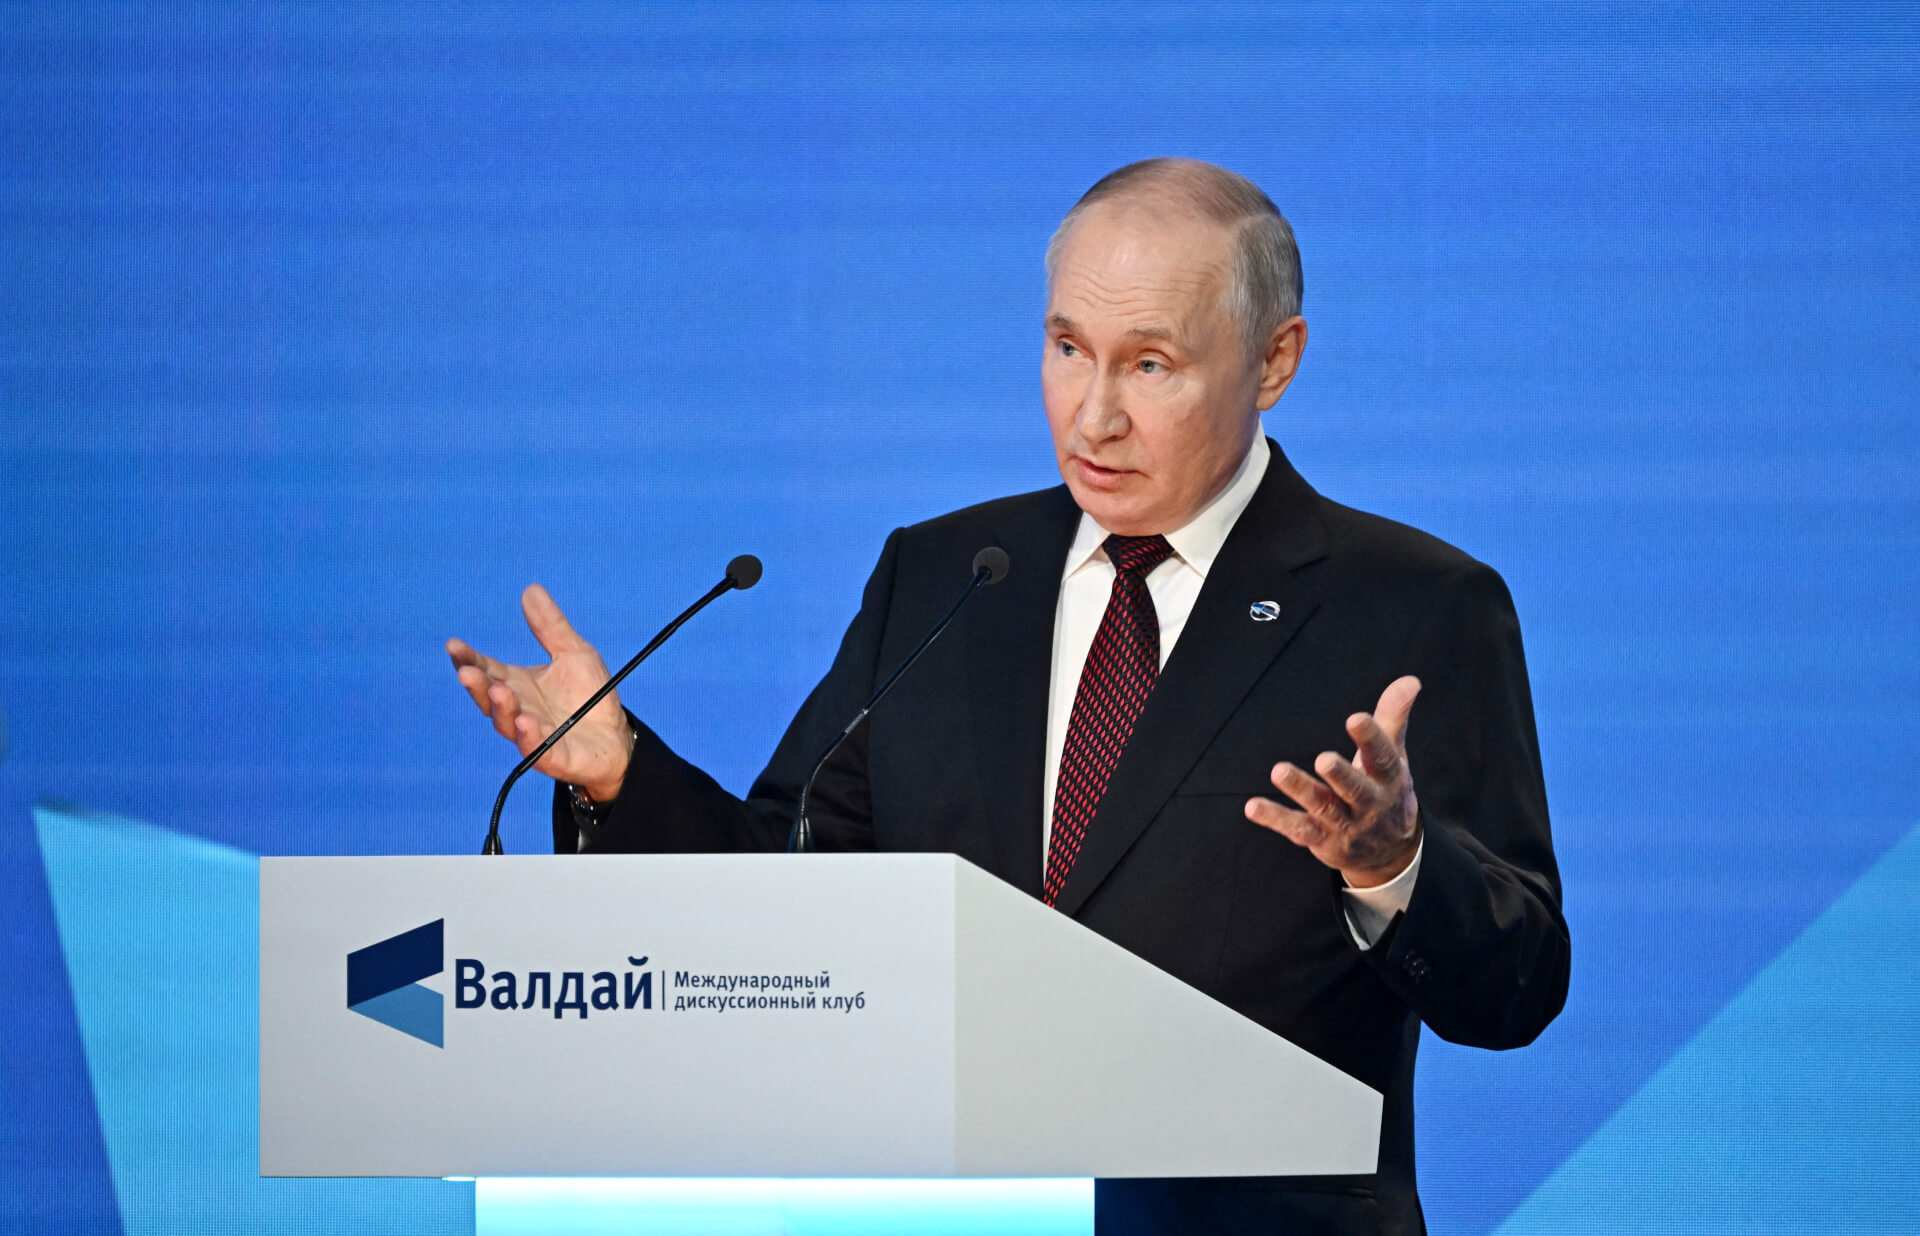 Putin Praises India, Echoes Support for New Delhi’s Permanent Membership of UNSC